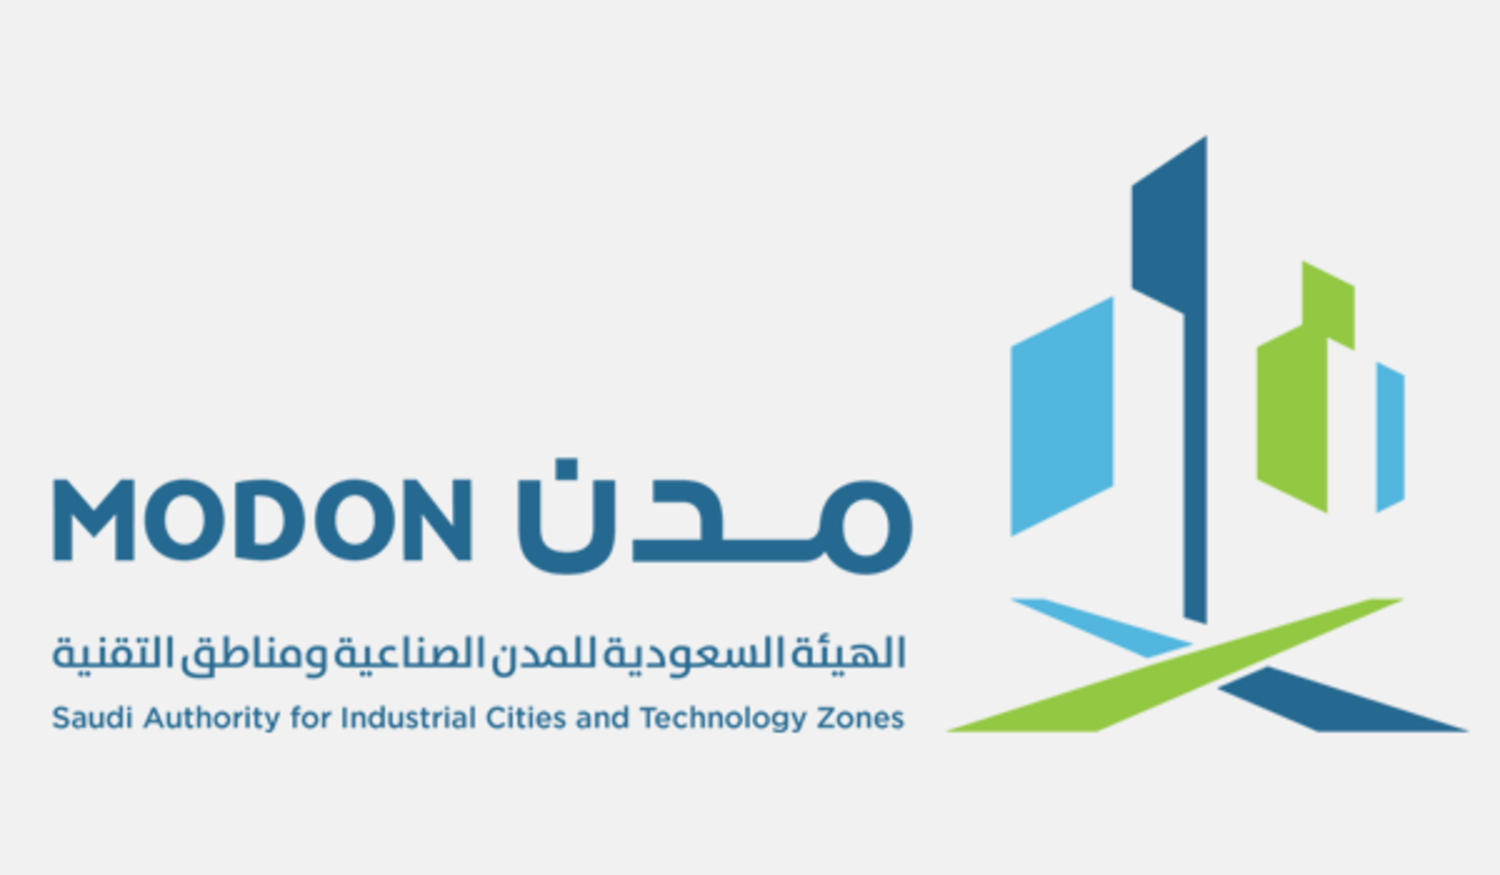 Saudi Authority for Industrial Cities and Technology Zones (MODON)